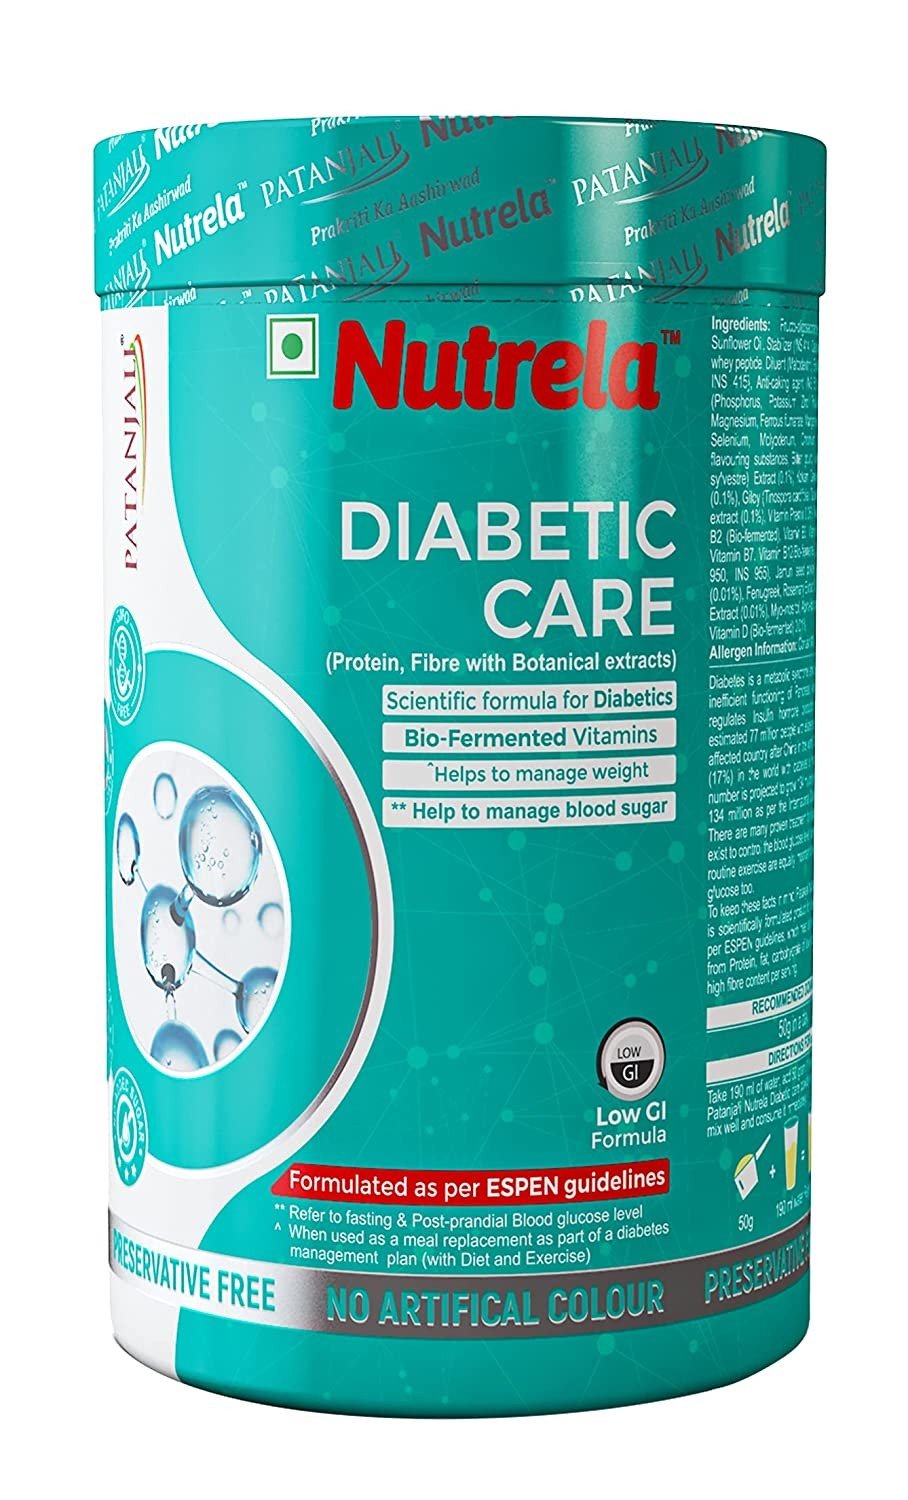 Nutrela Diabetic Care(400g ) Protein Powder, Adult Nutritional Health Drink ,for Diabetes, and Weight Management - Vanilla Flavour